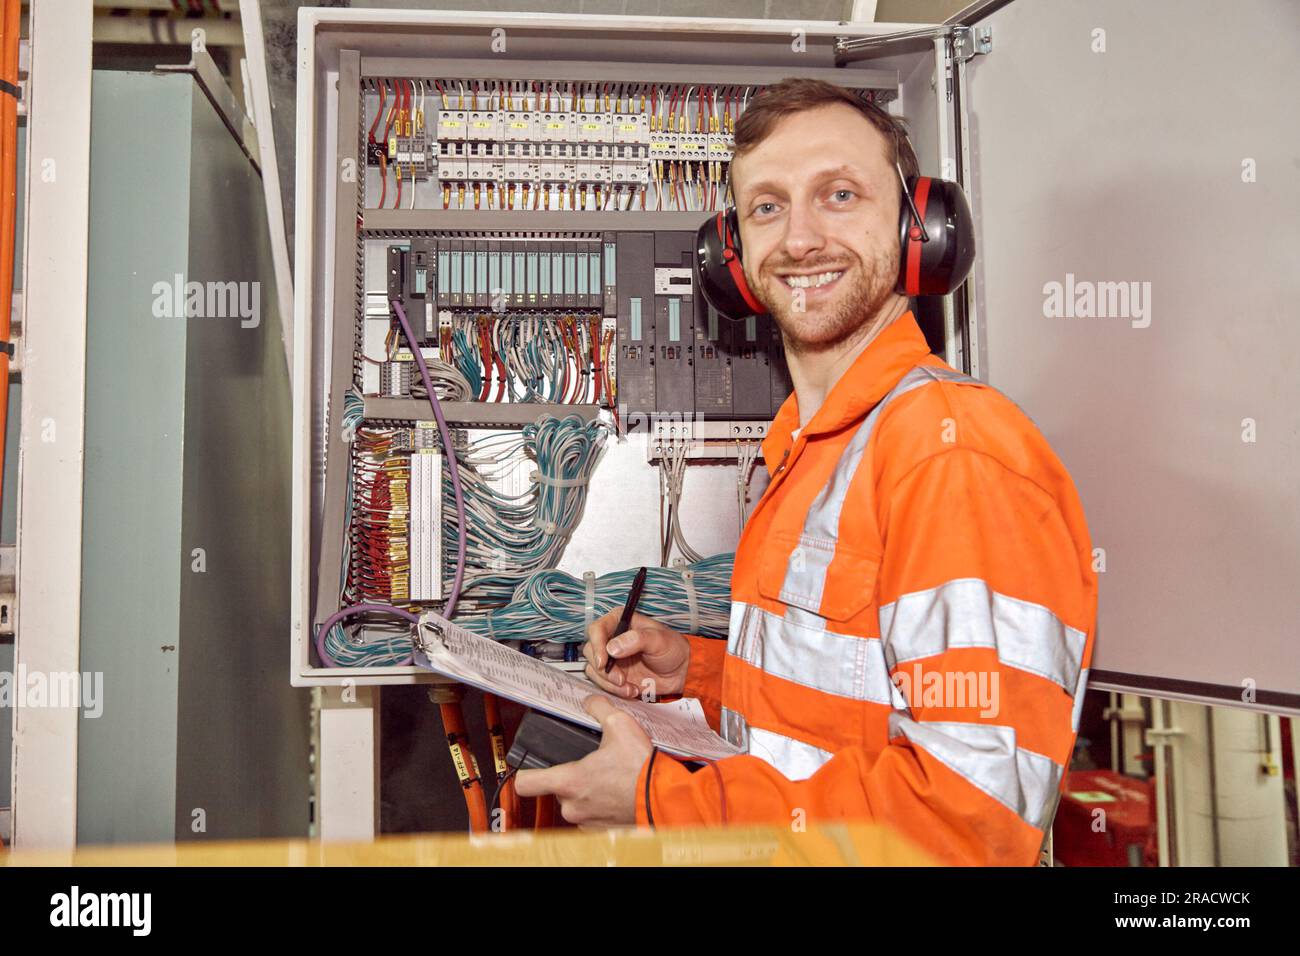 Offshore electrical engineer checking electrical equipment. Young oil and gas professional. Stock Photo